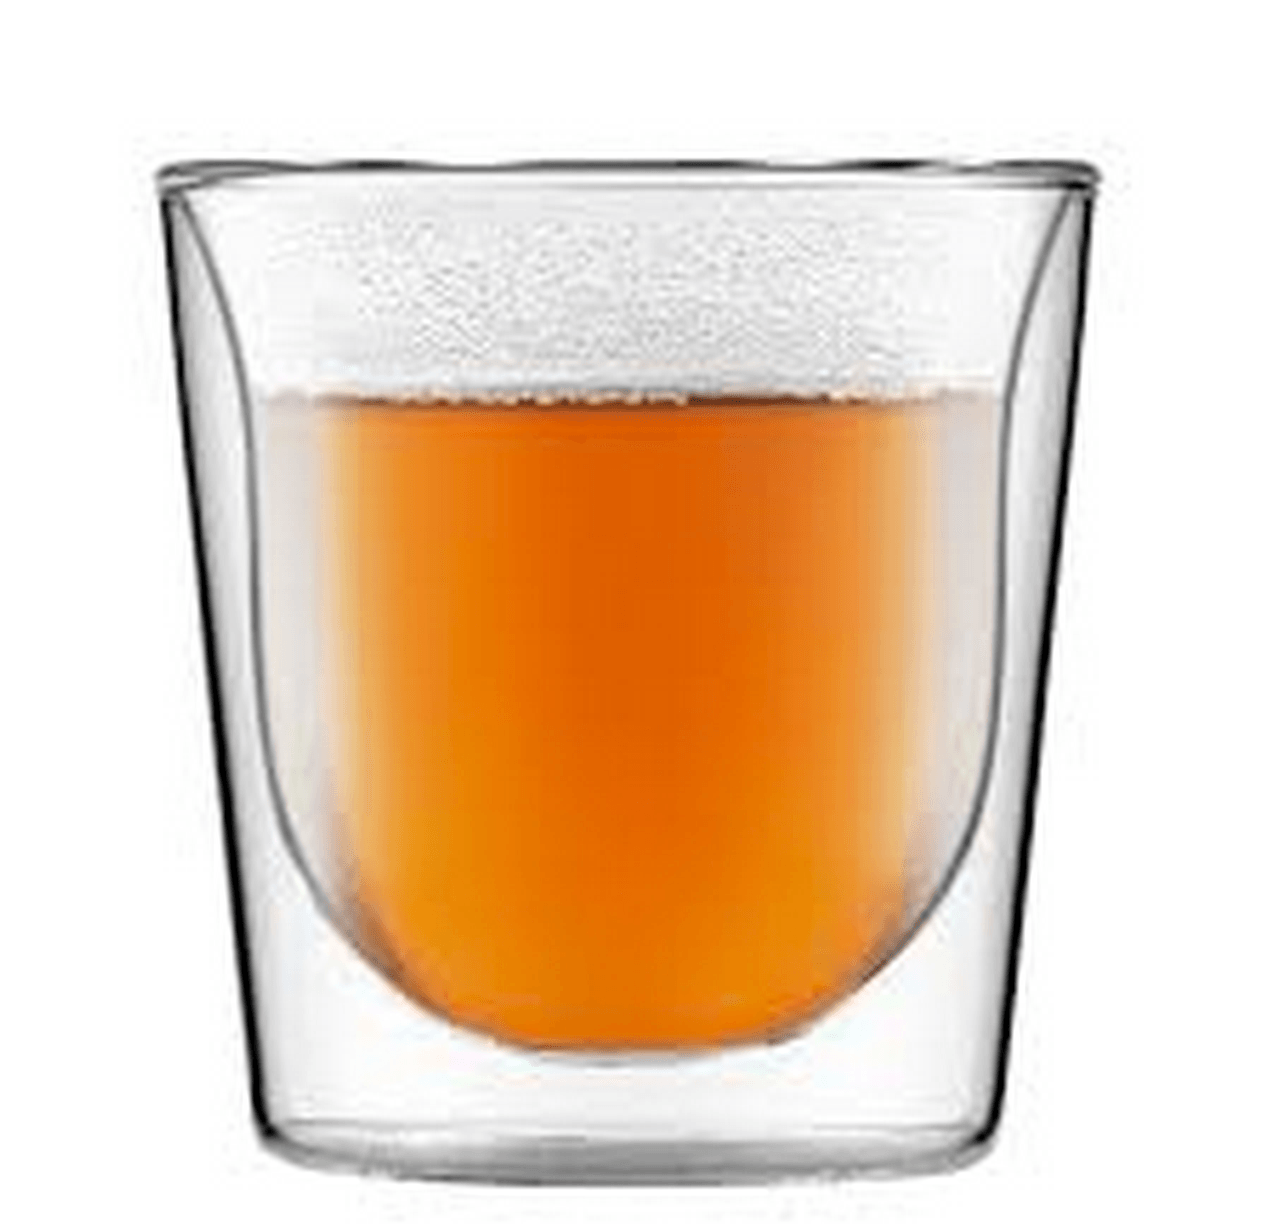 Borosilicate double Wall Delight Glass, Insulated transparent glass, Whiskey, Cocktail Glasses, Lightweight, Dishwasher Safe, Luxury Gift Set for Men or Women, friends, 250 ml, Pack of 2